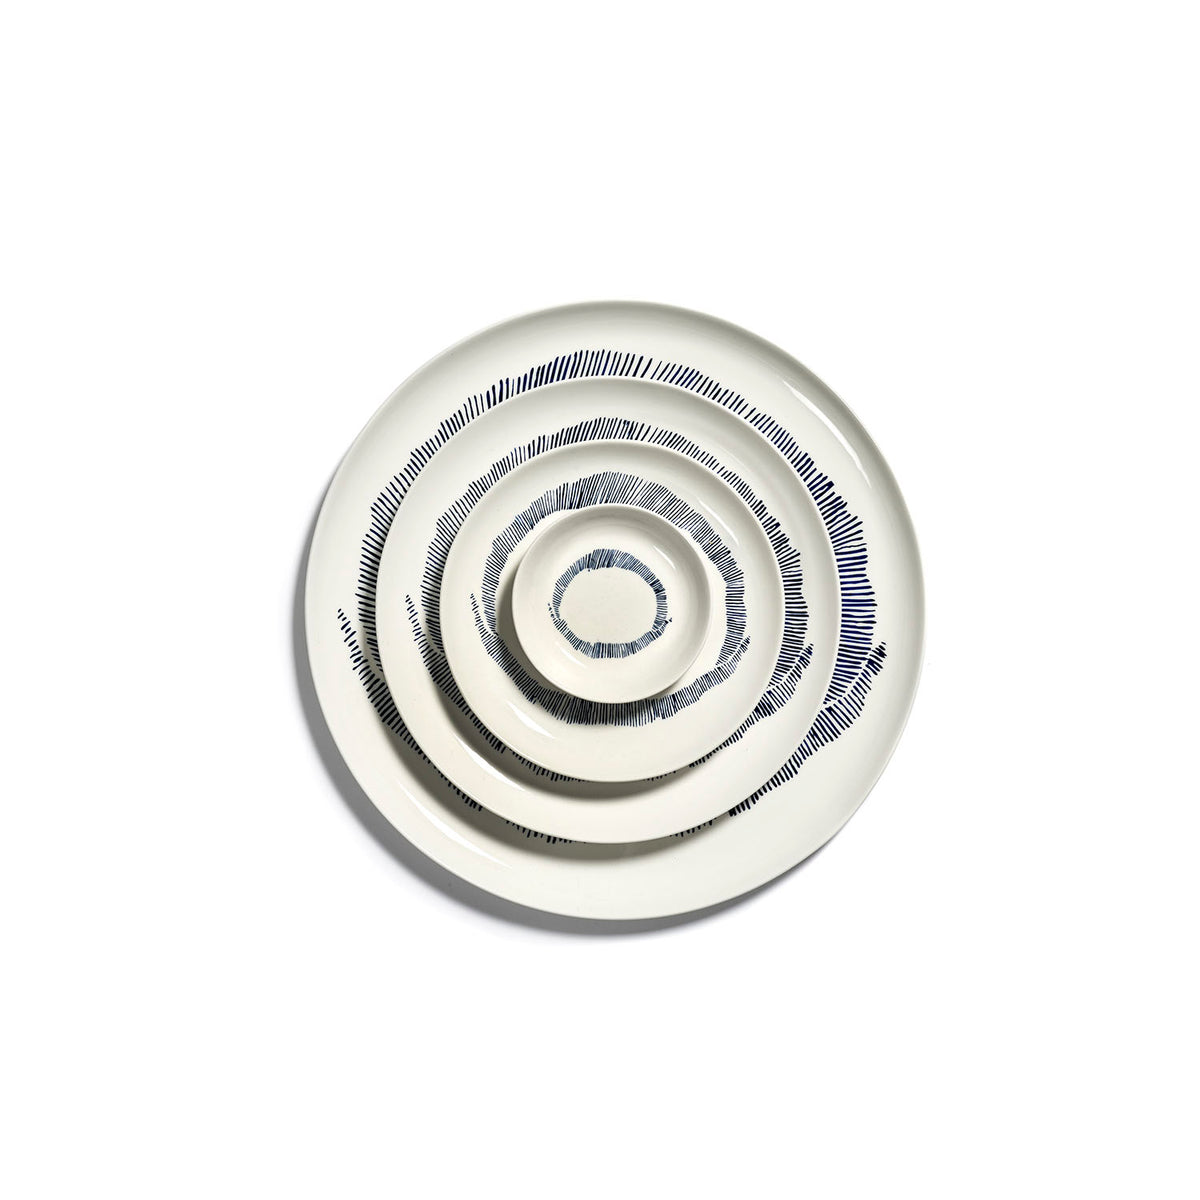 Ottolenghi for Serax Feast collection, group picture of tableware including small dish, with white swirl and blue stripes design.